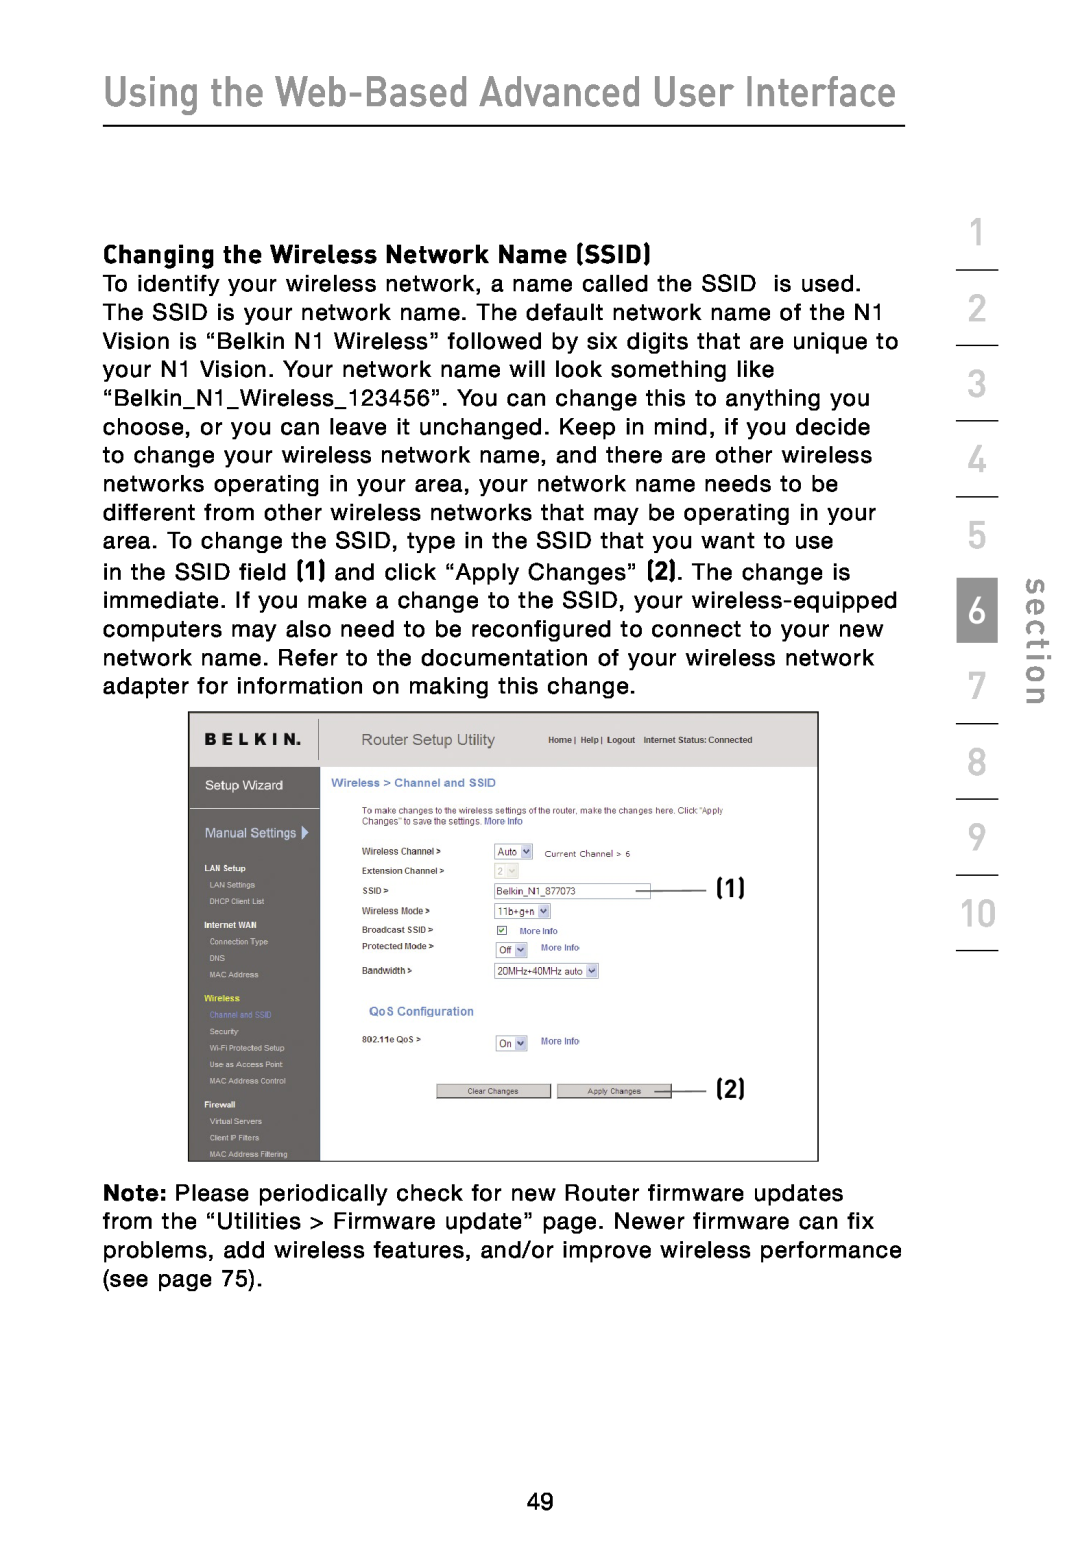 Belkin N1 user manual Using the Web-Based Advanced User Interface, Changing the Wireless Network Name SSID, section 